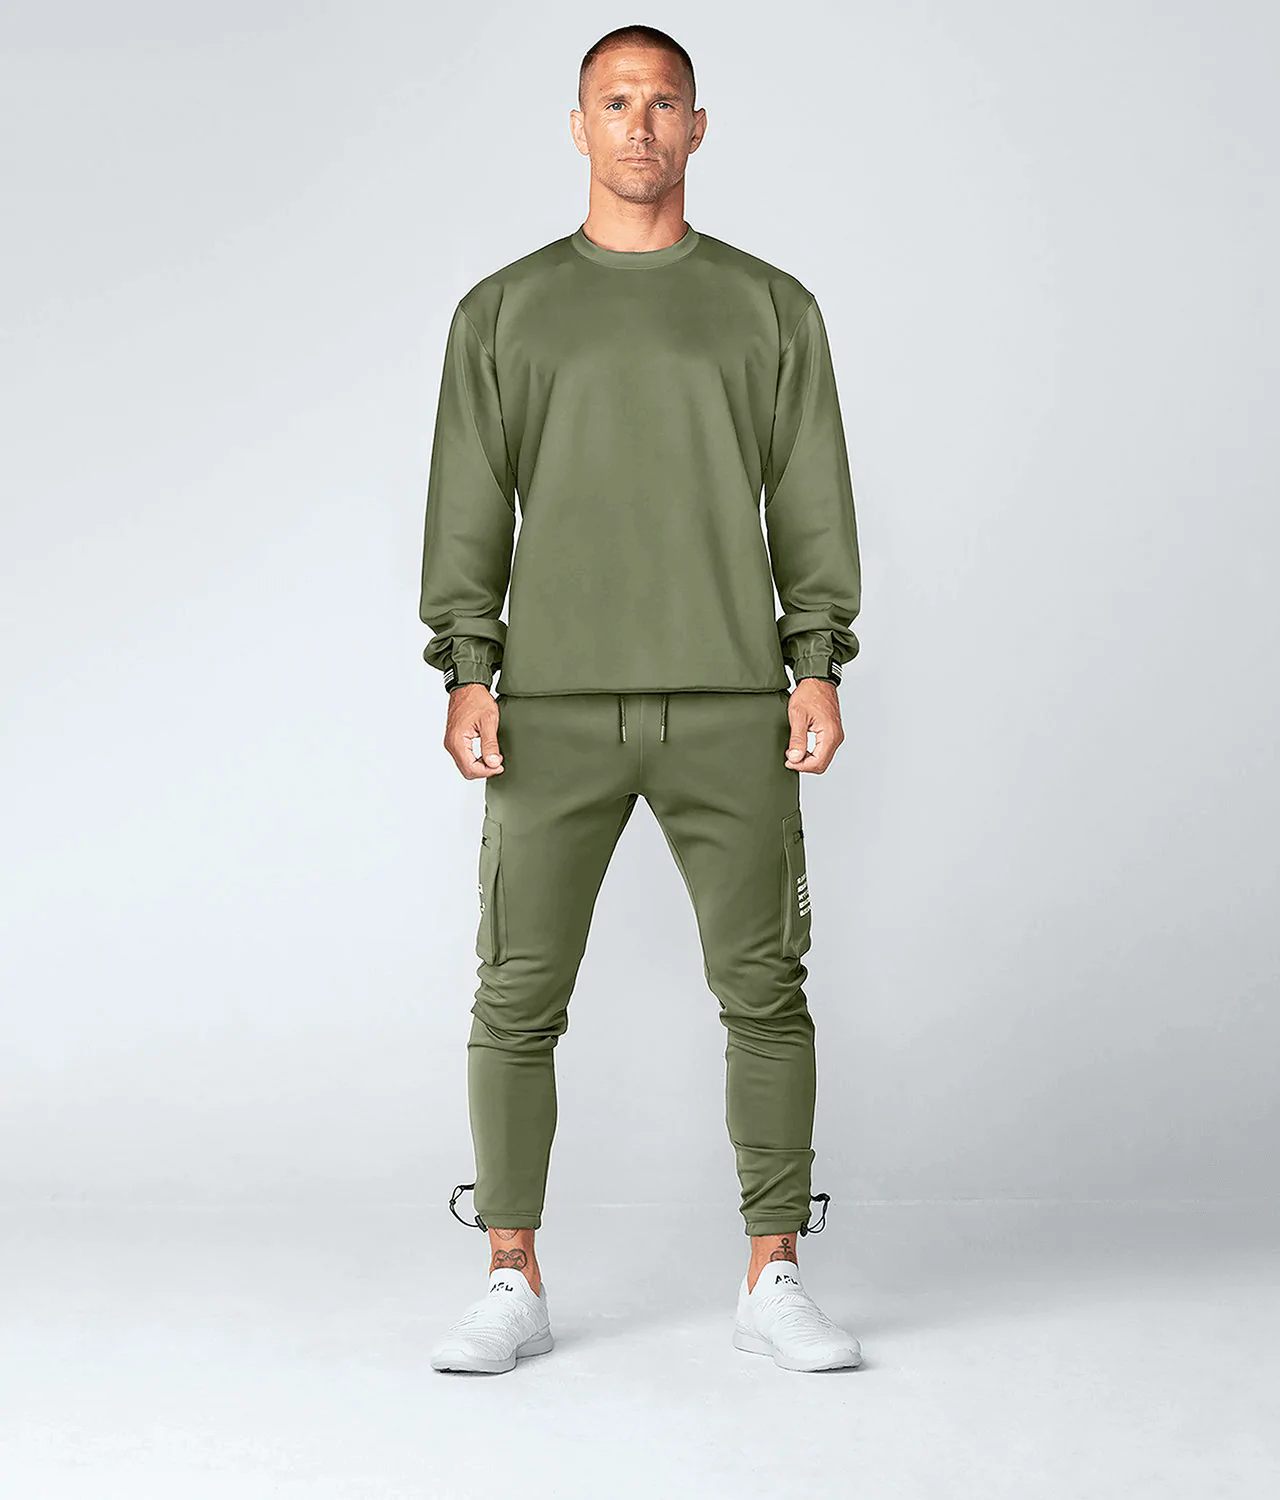 Shoppers Love These Cargo Pants and Joggers